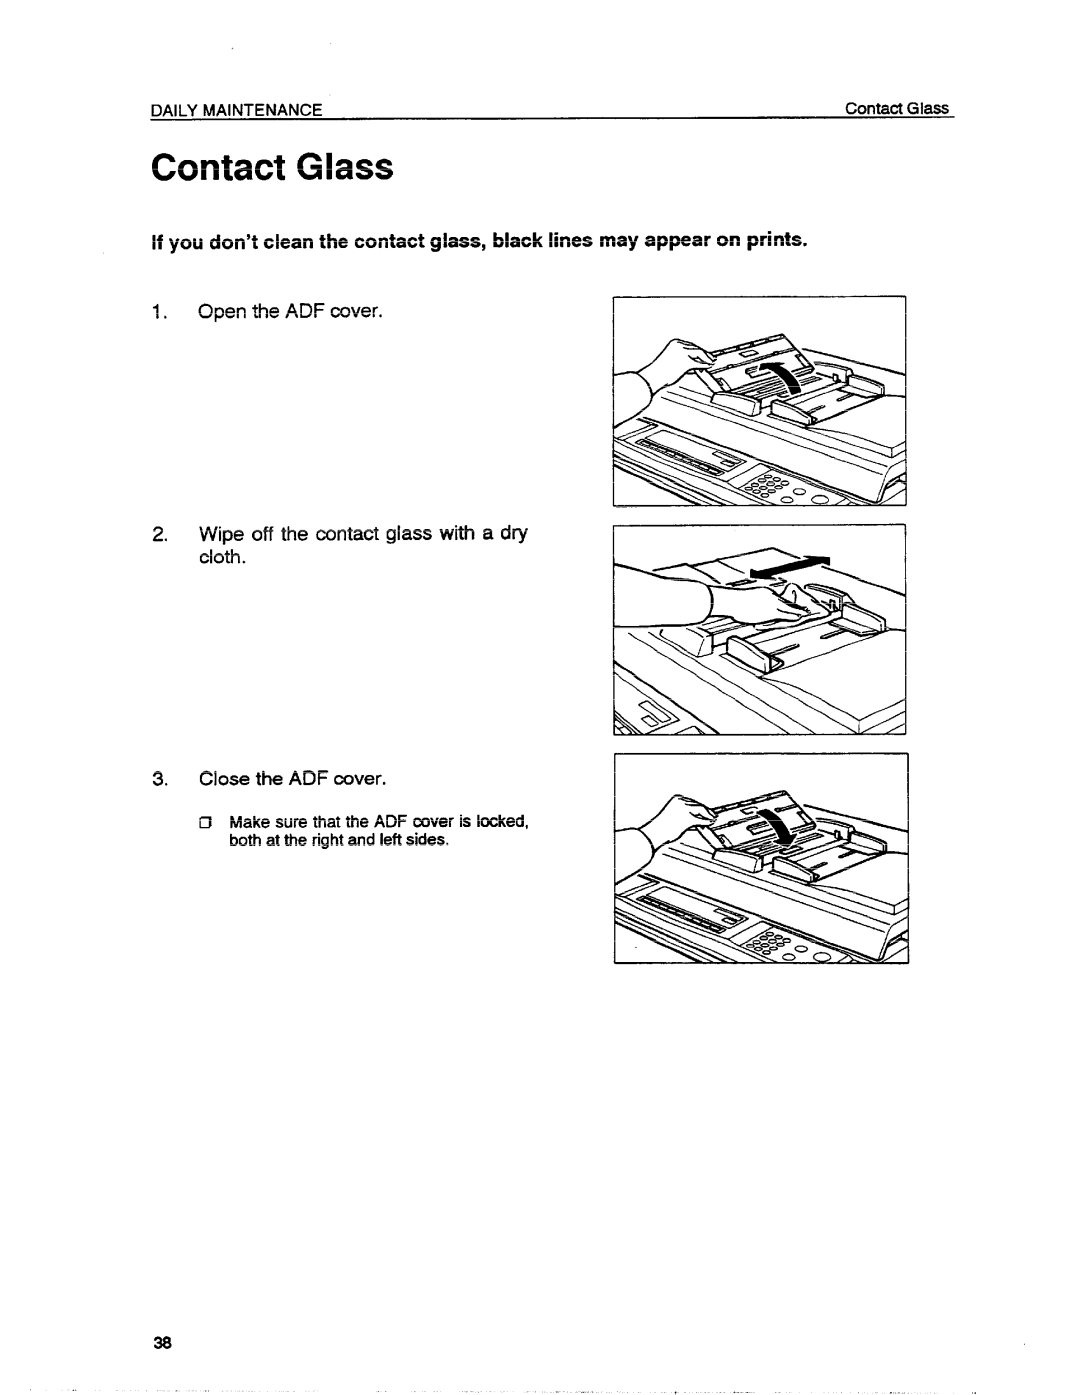 Ricoh VT1730 manual Contact Glass, Open the ADF cover 2. Wipe off the mntact glass with a dry cloth, Close the ADF cover 